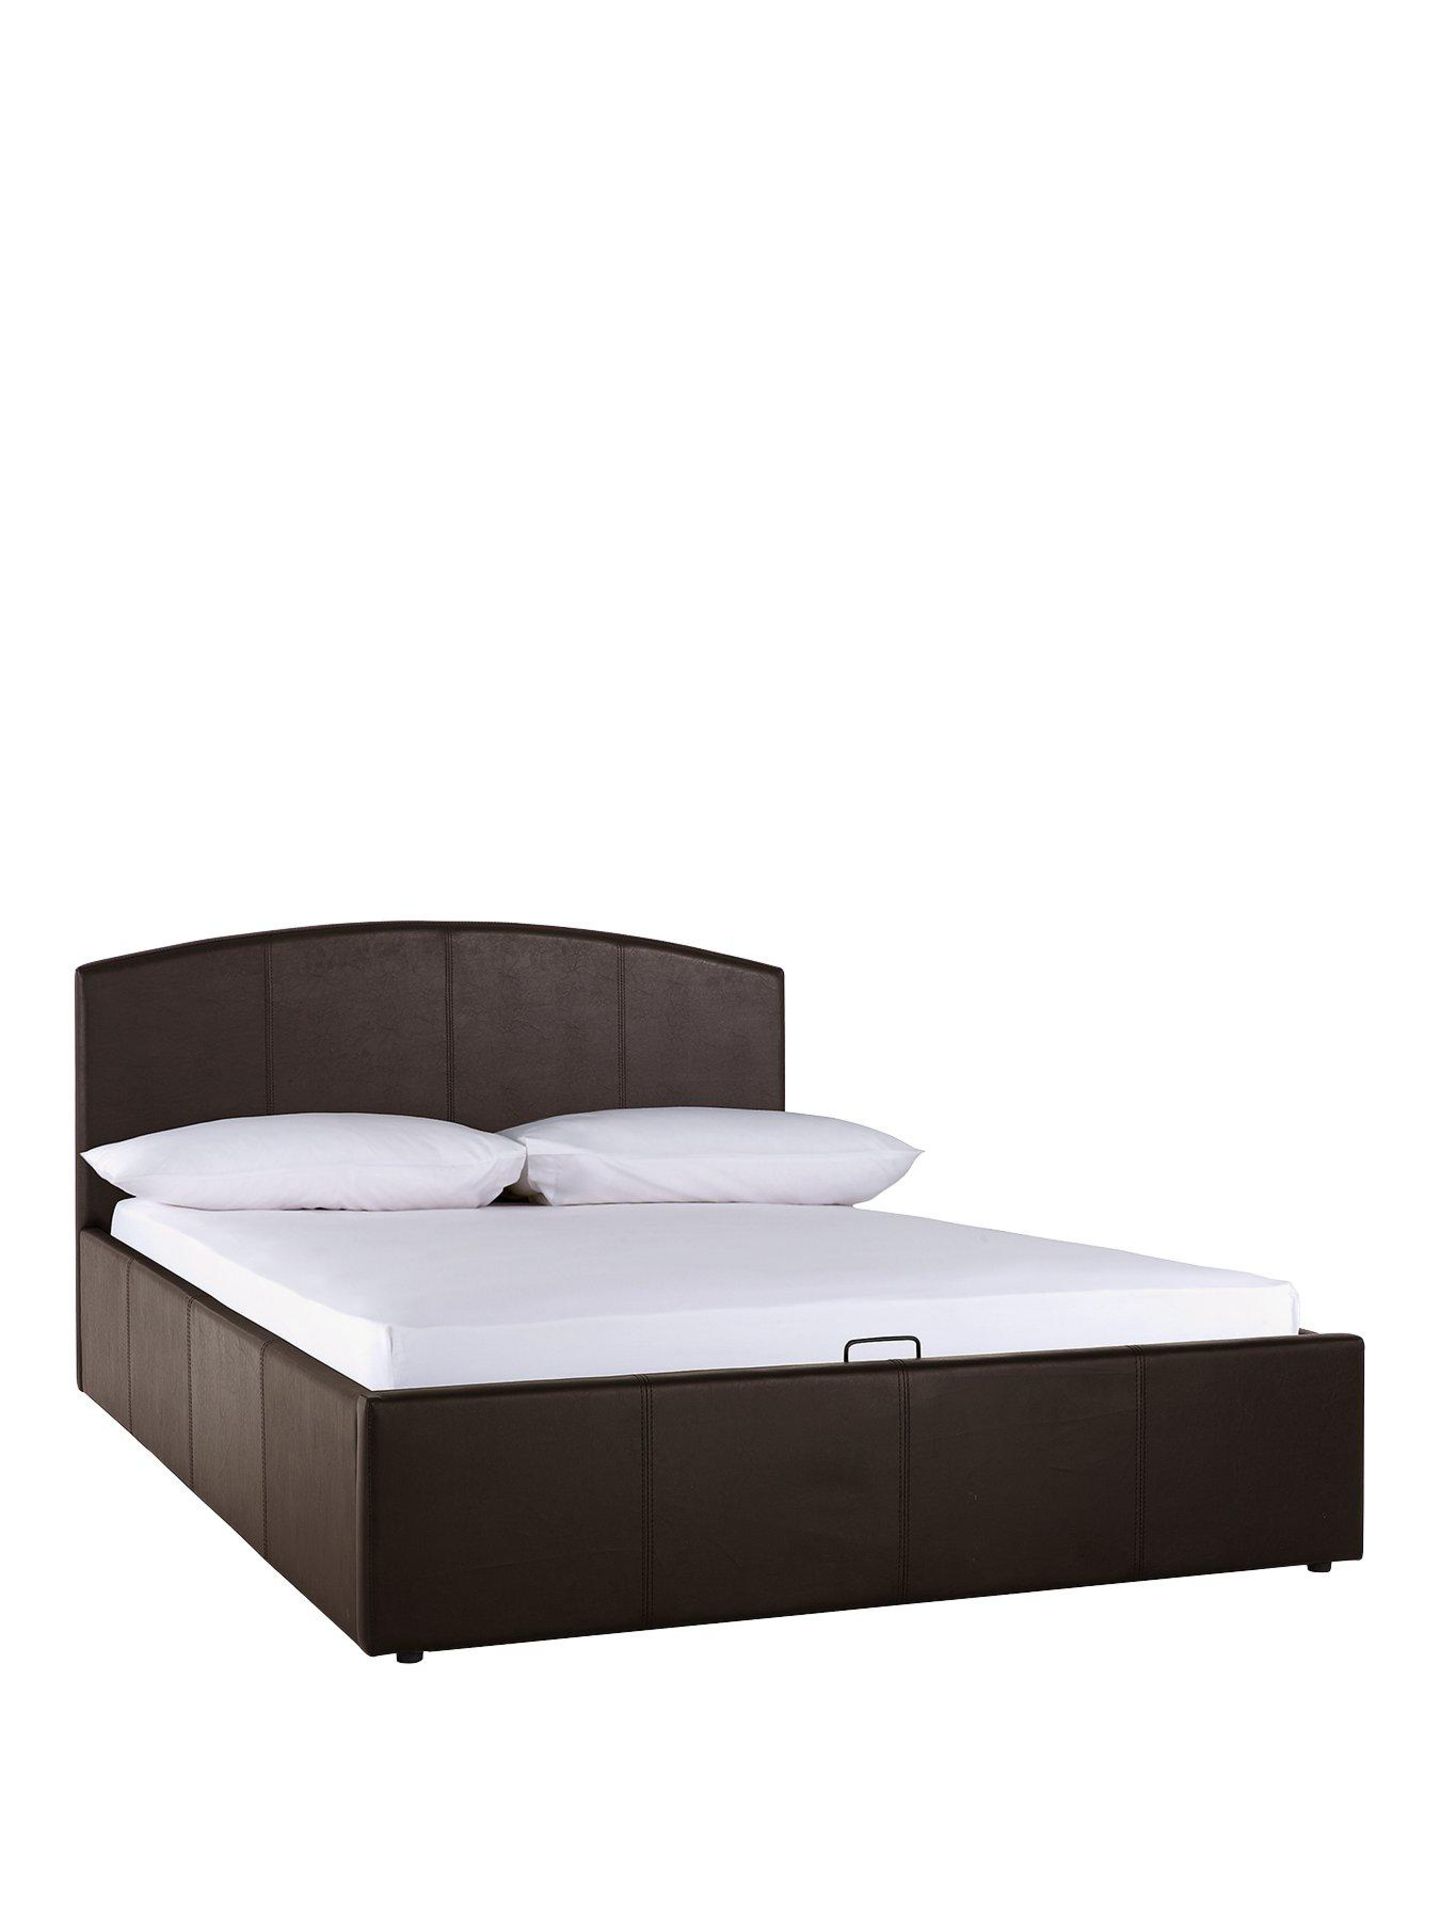 Boxed Item Marston King Lift-Up Bed [Chocolate] 88X159X212Cm Rrp:£658.0